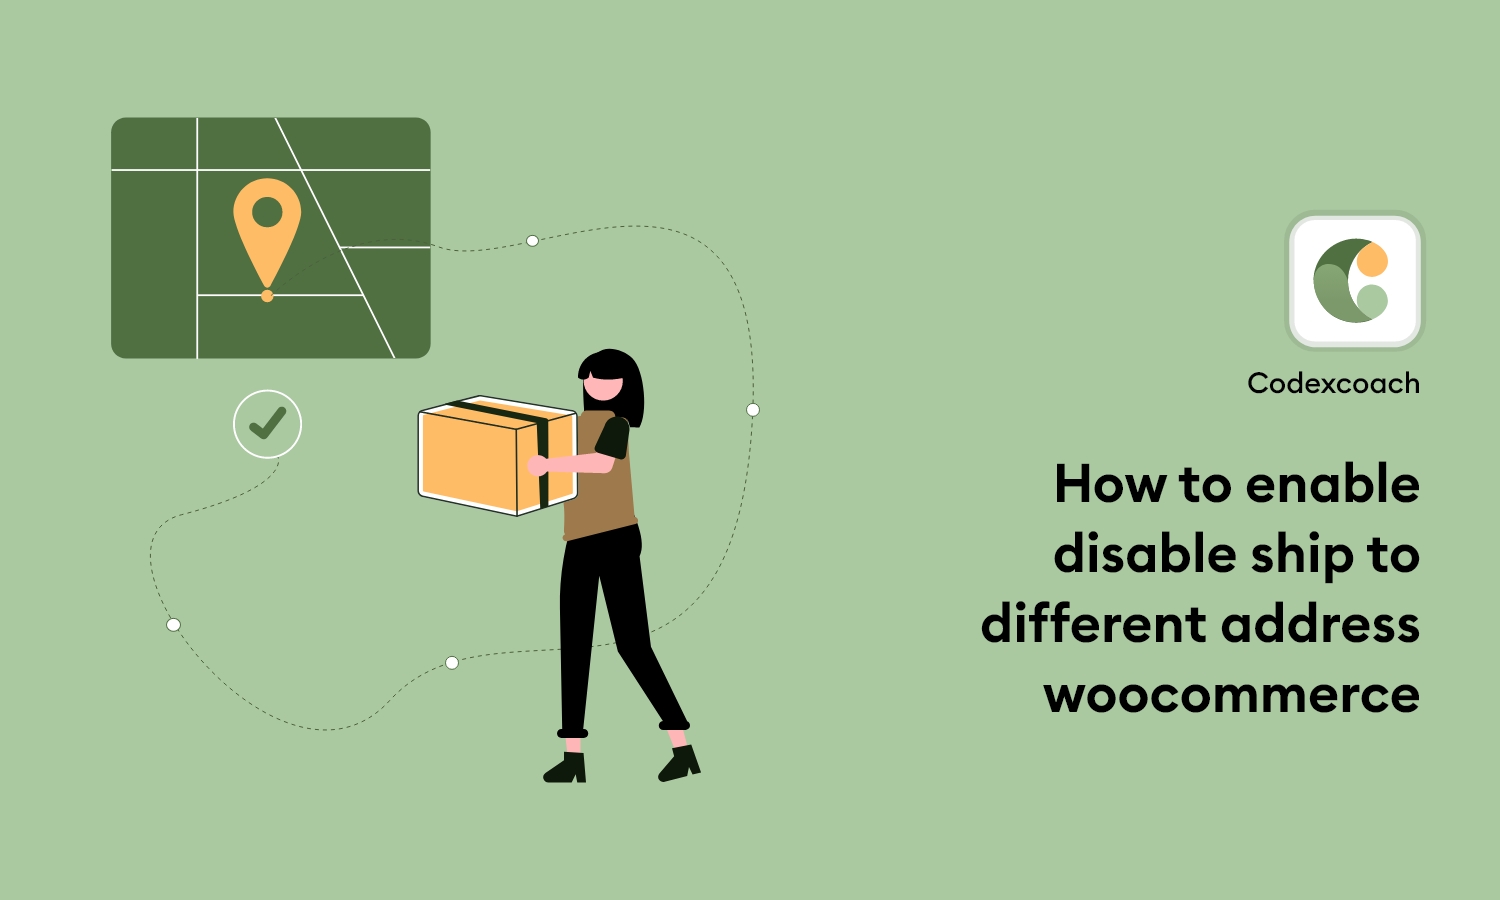 How to enable disable ship to different address woocommerce